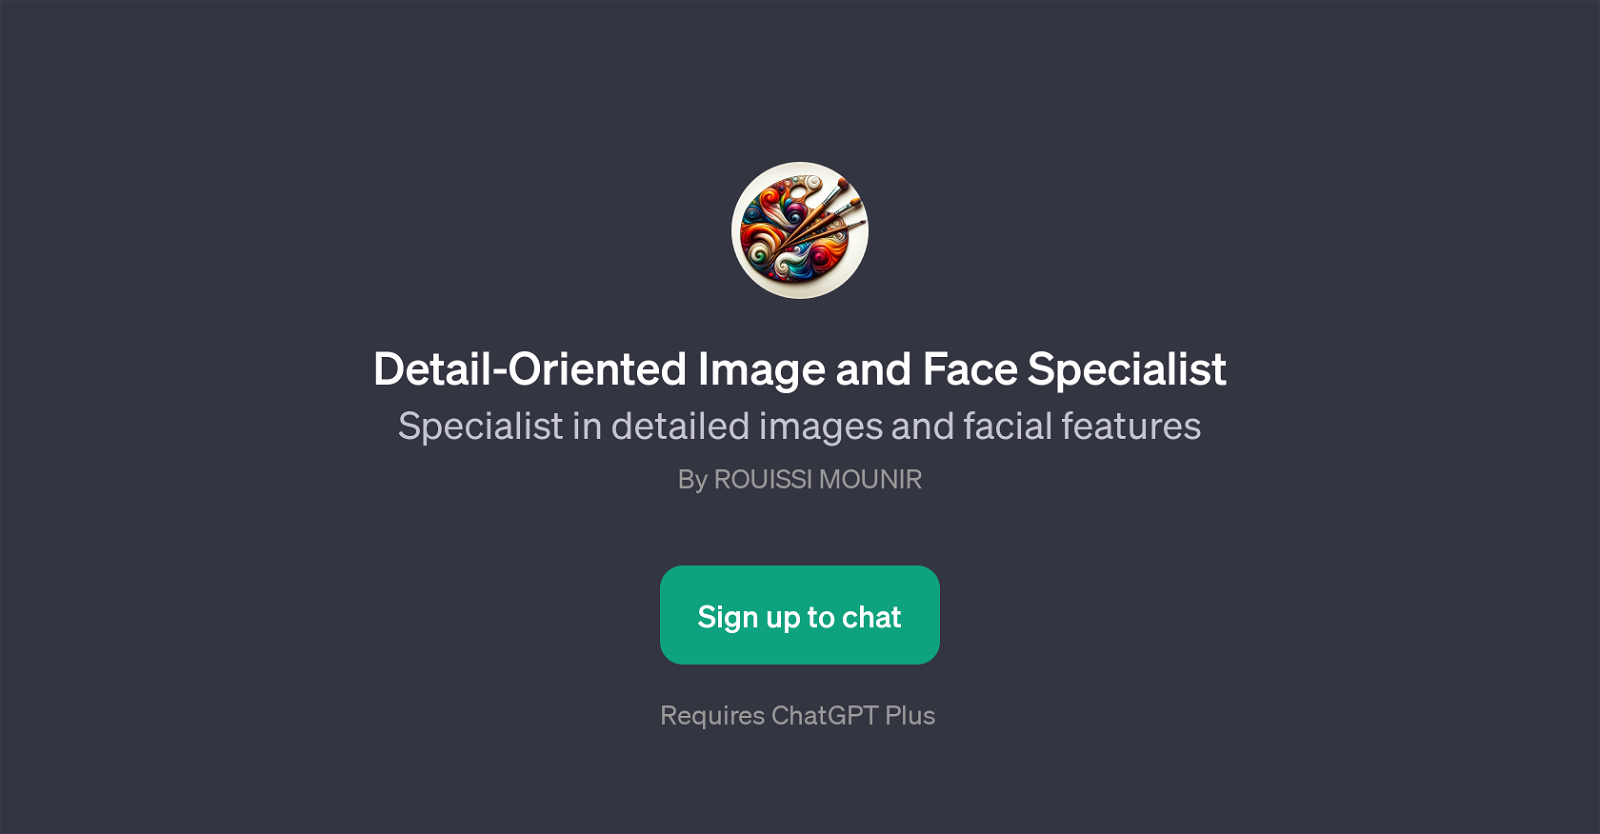 Detail-Oriented Image and Face Specialist website